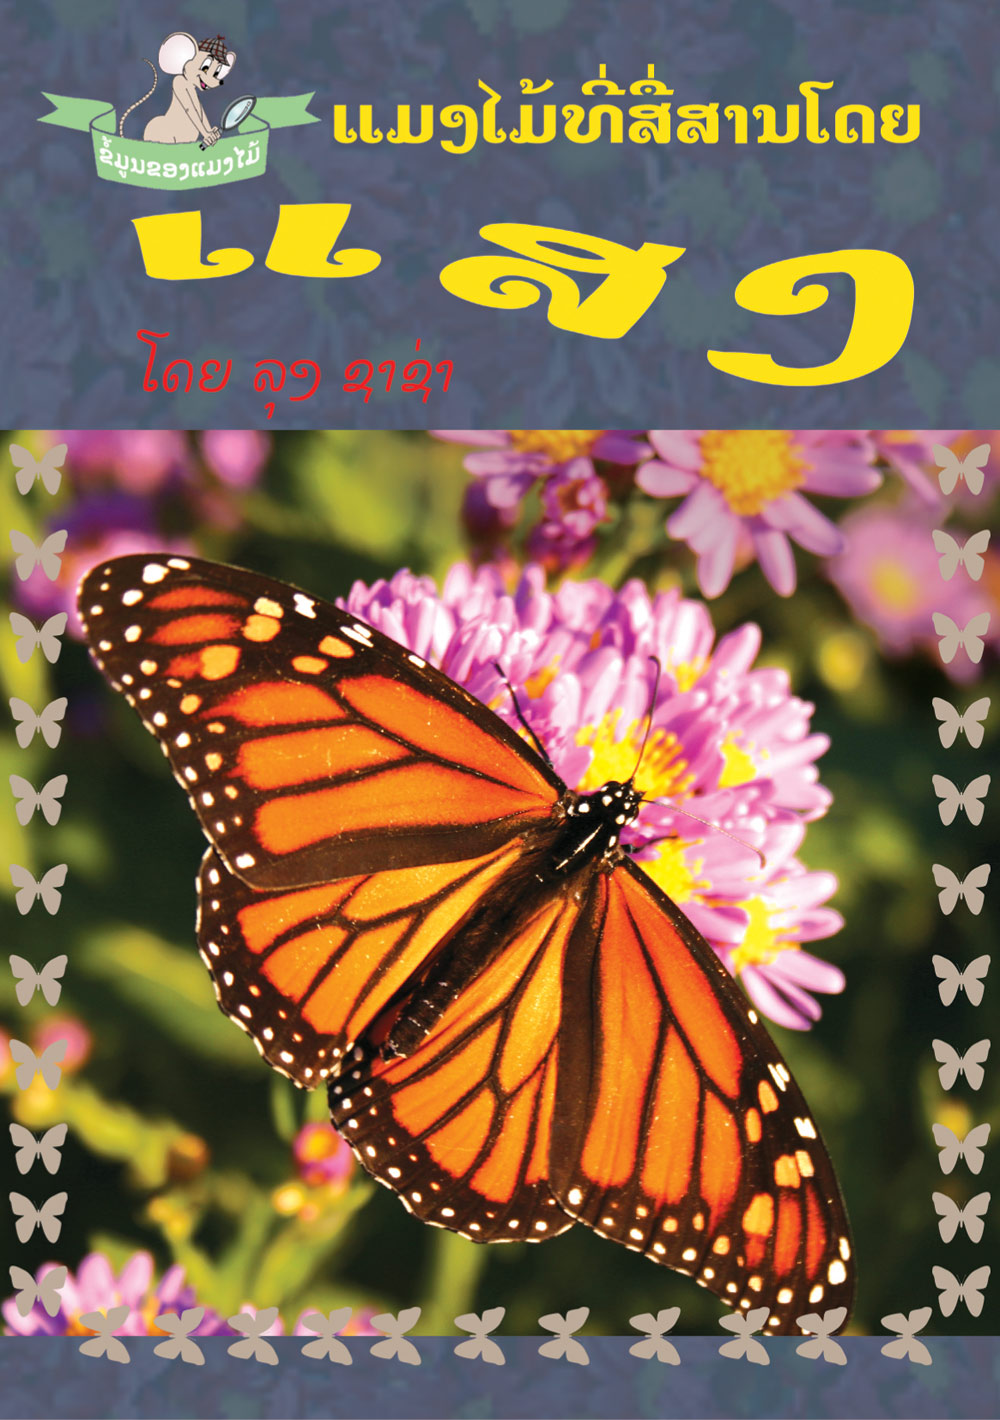 The Insect That Uses Light to Talk large book cover, published in Lao language